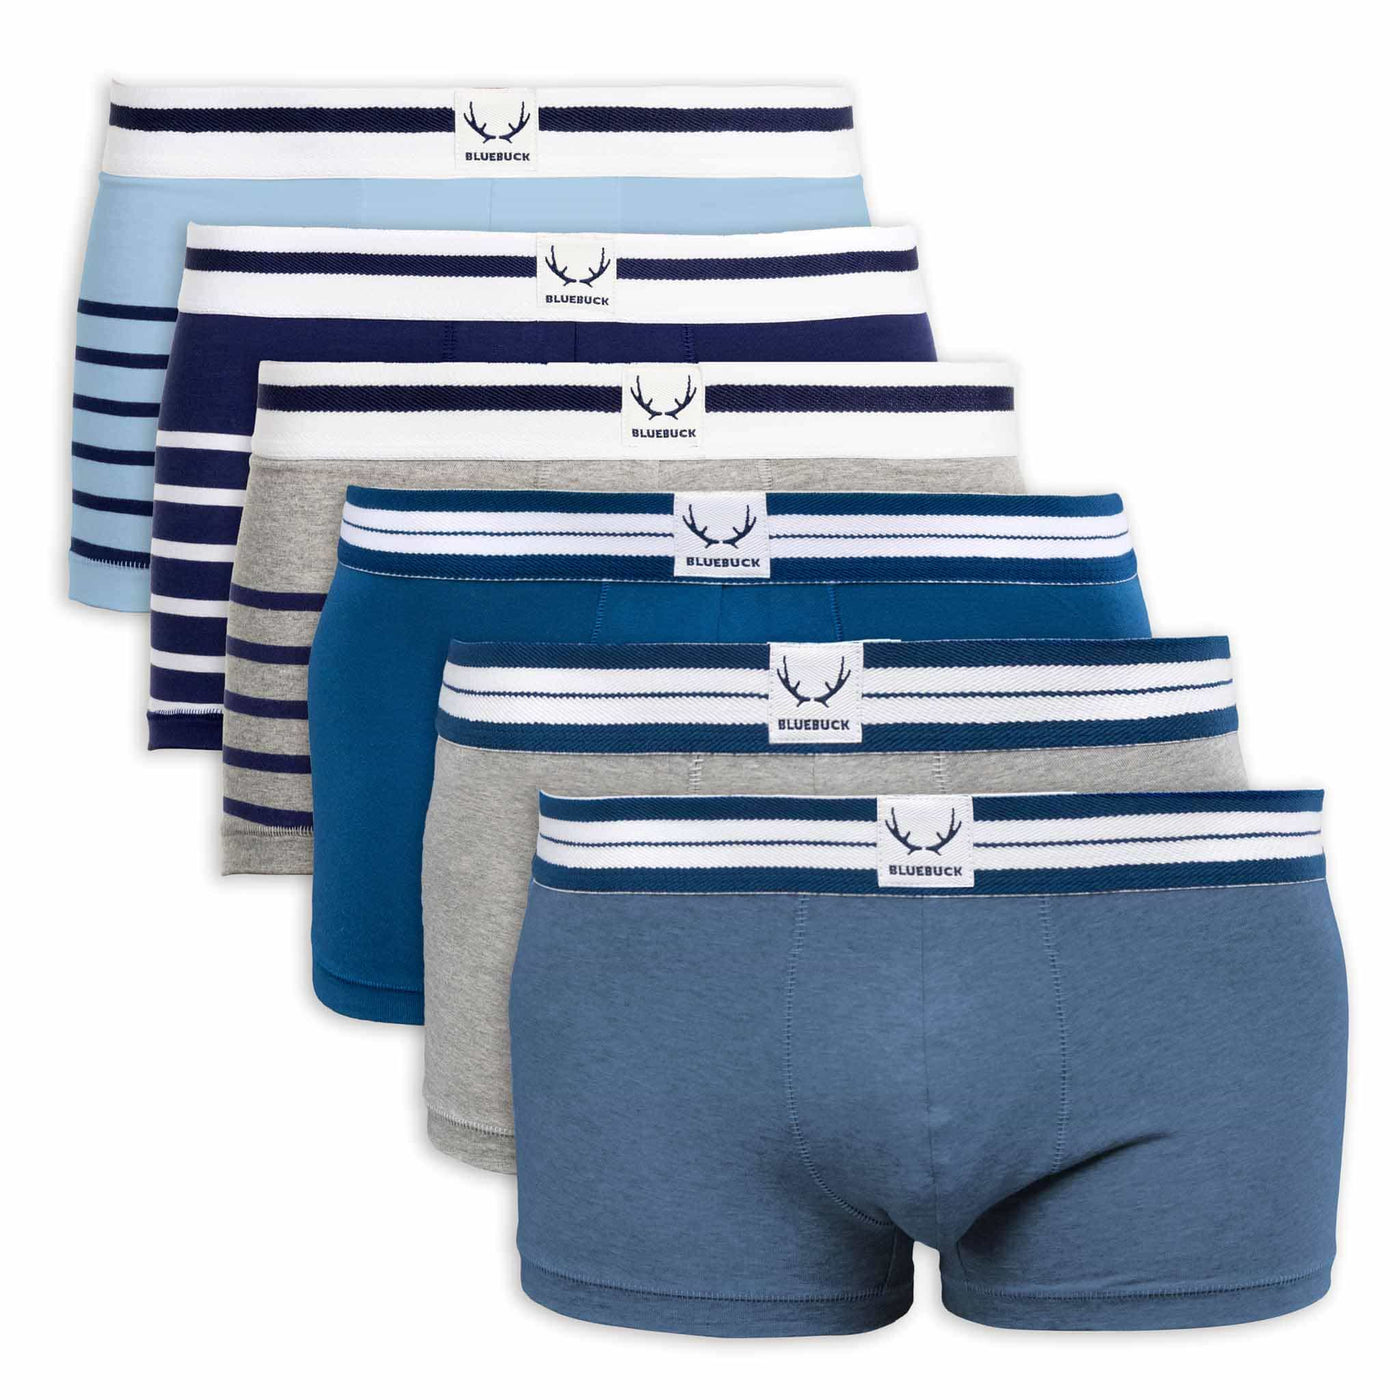 6 organic cotton trunks - blue & grey classic and stripes